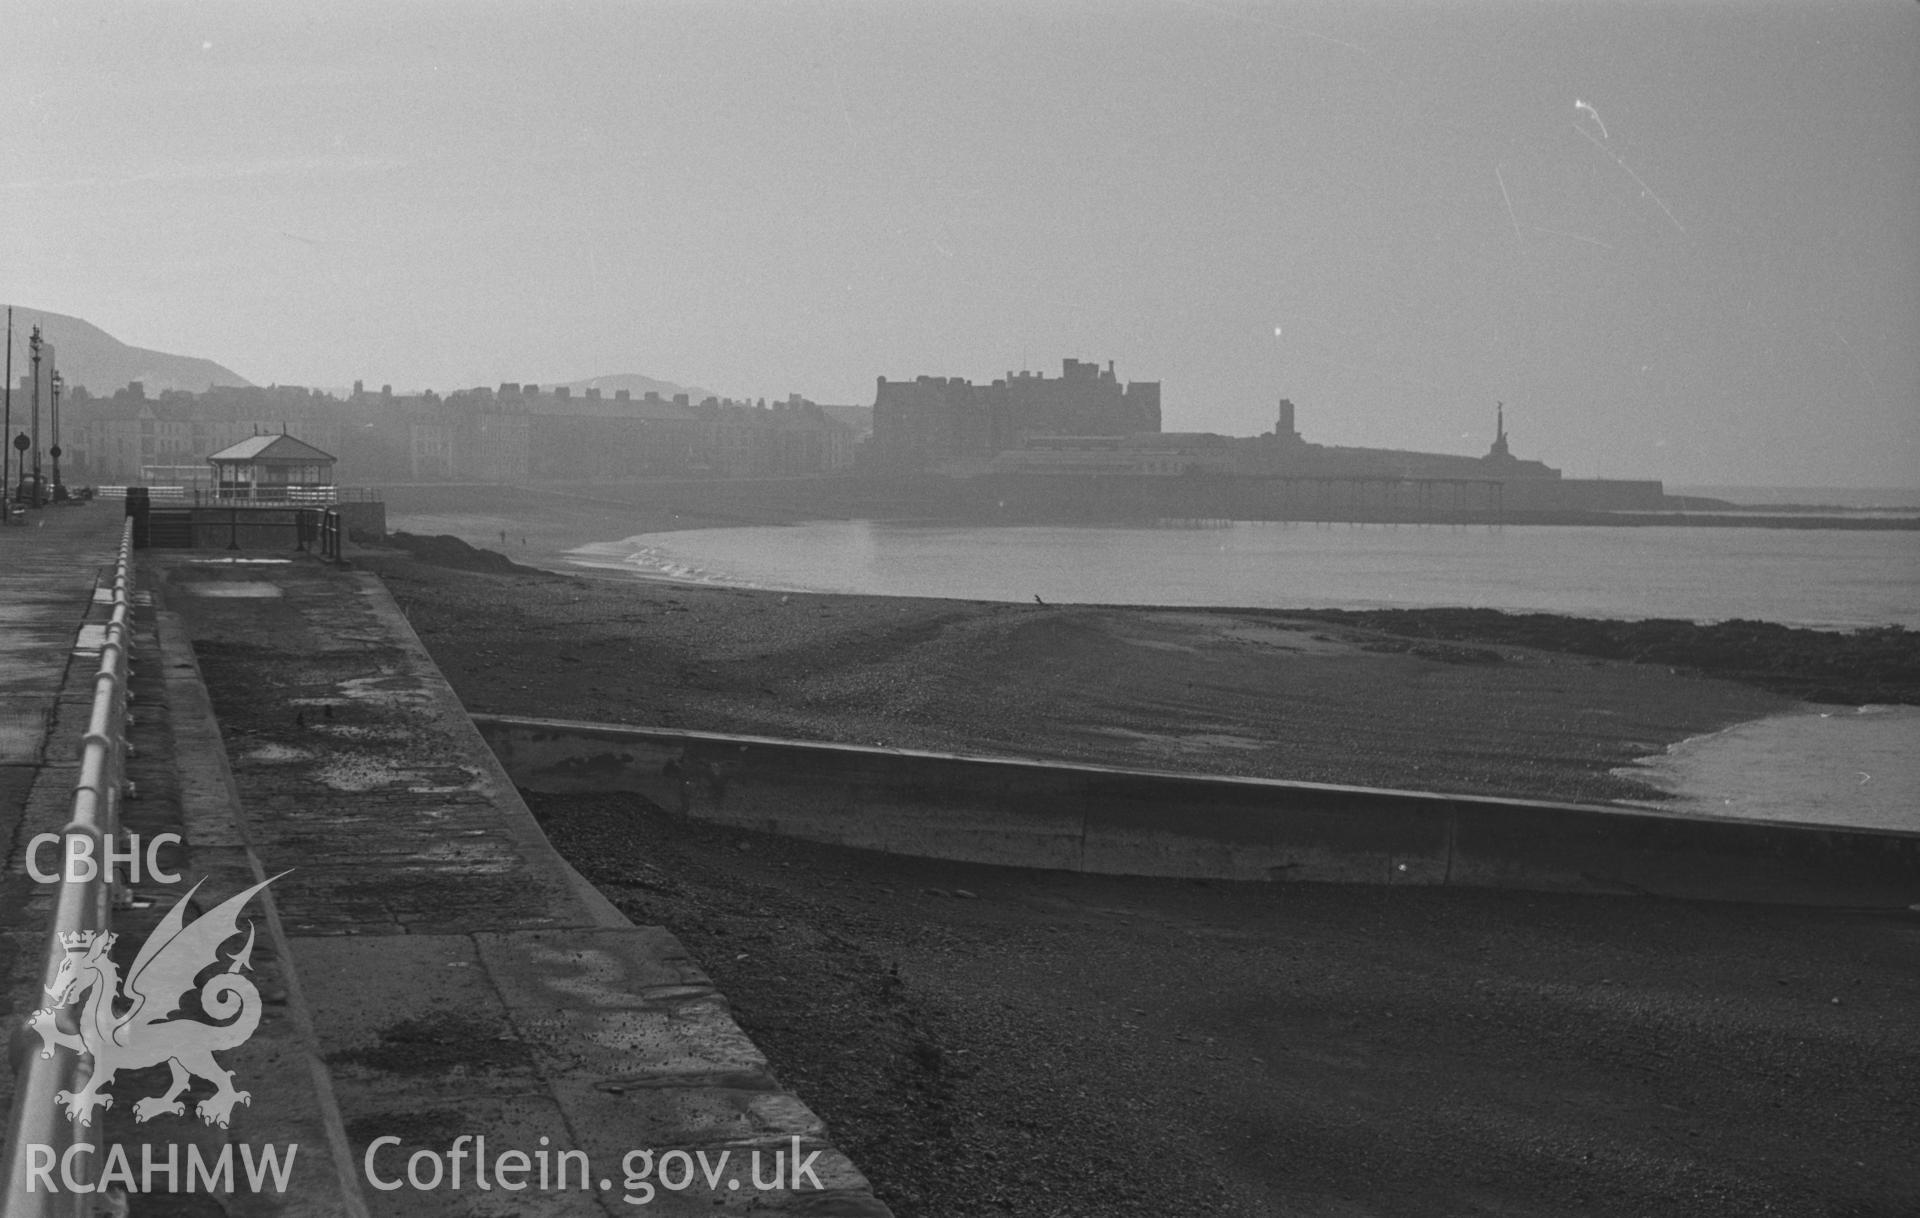 Black and White photograph showing Aberystwyth Promenade, with distant views of Marine Terrace, the Old College, Pier Pavillion and the Castle. Photographed by Arthur Chater in December 1962, from Grid Reference SN 5833 8232, looking south.